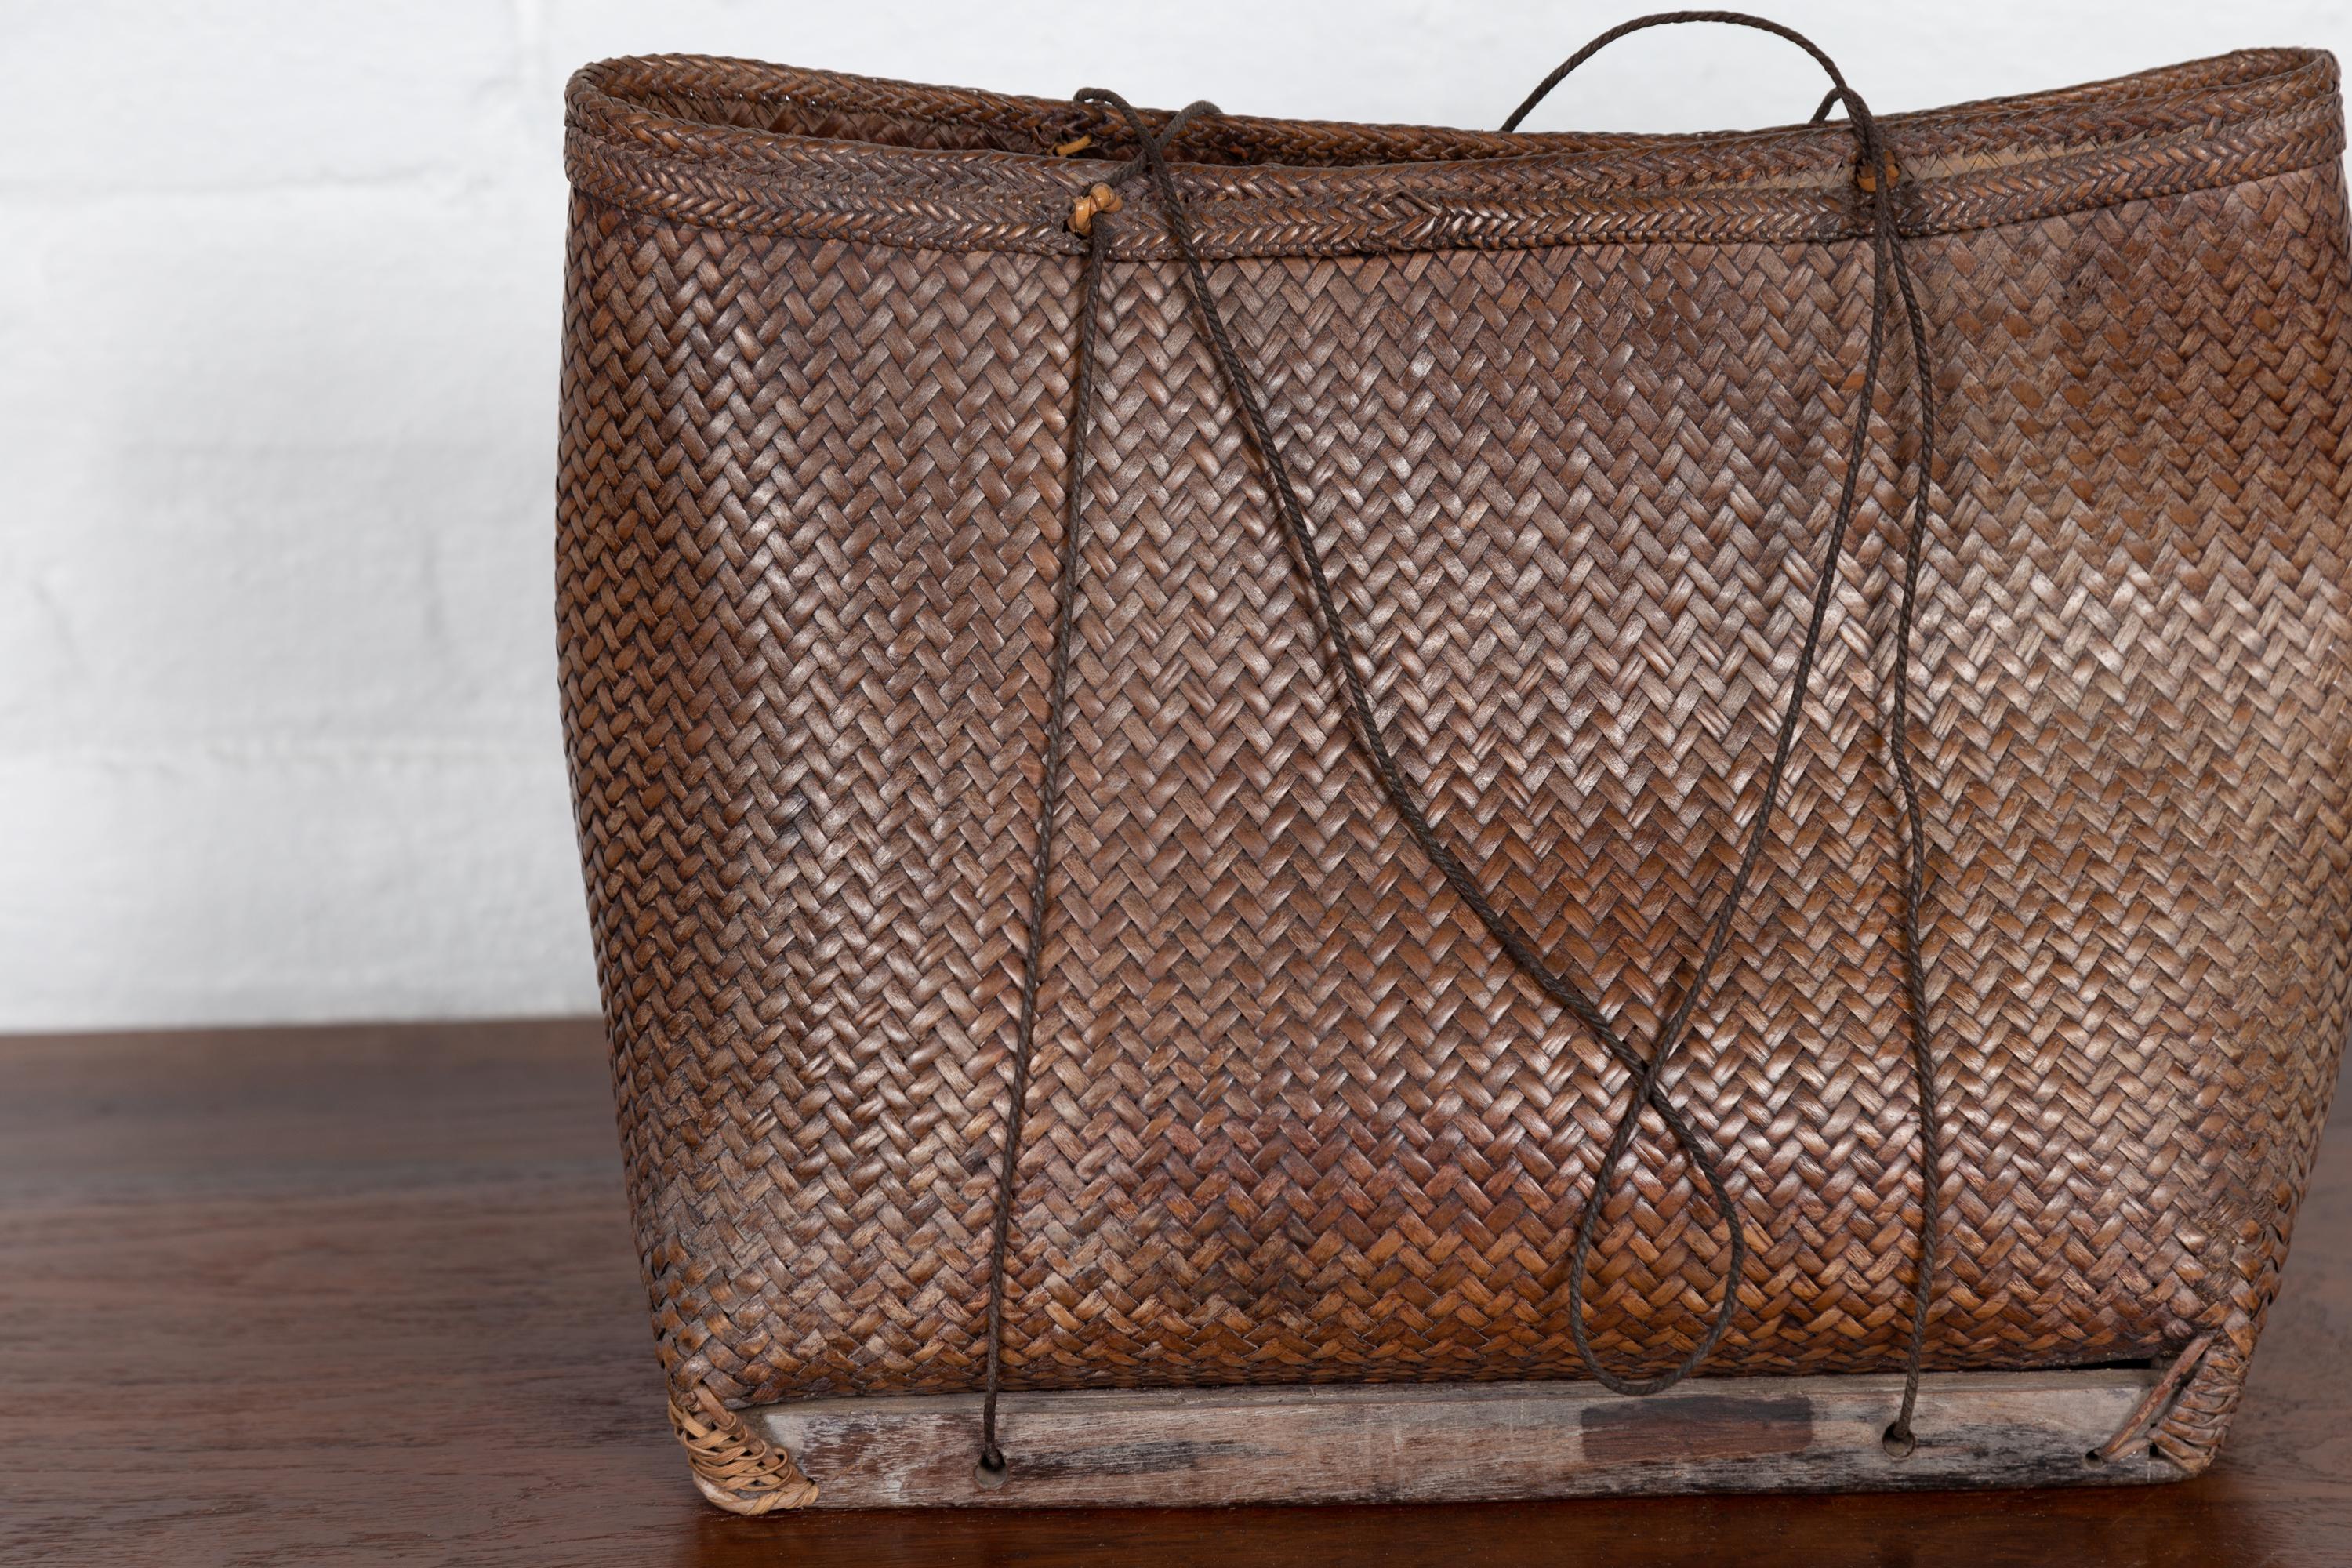 Rustic Antique Early 20th Century Small Woven Grain Basket from the Philippines